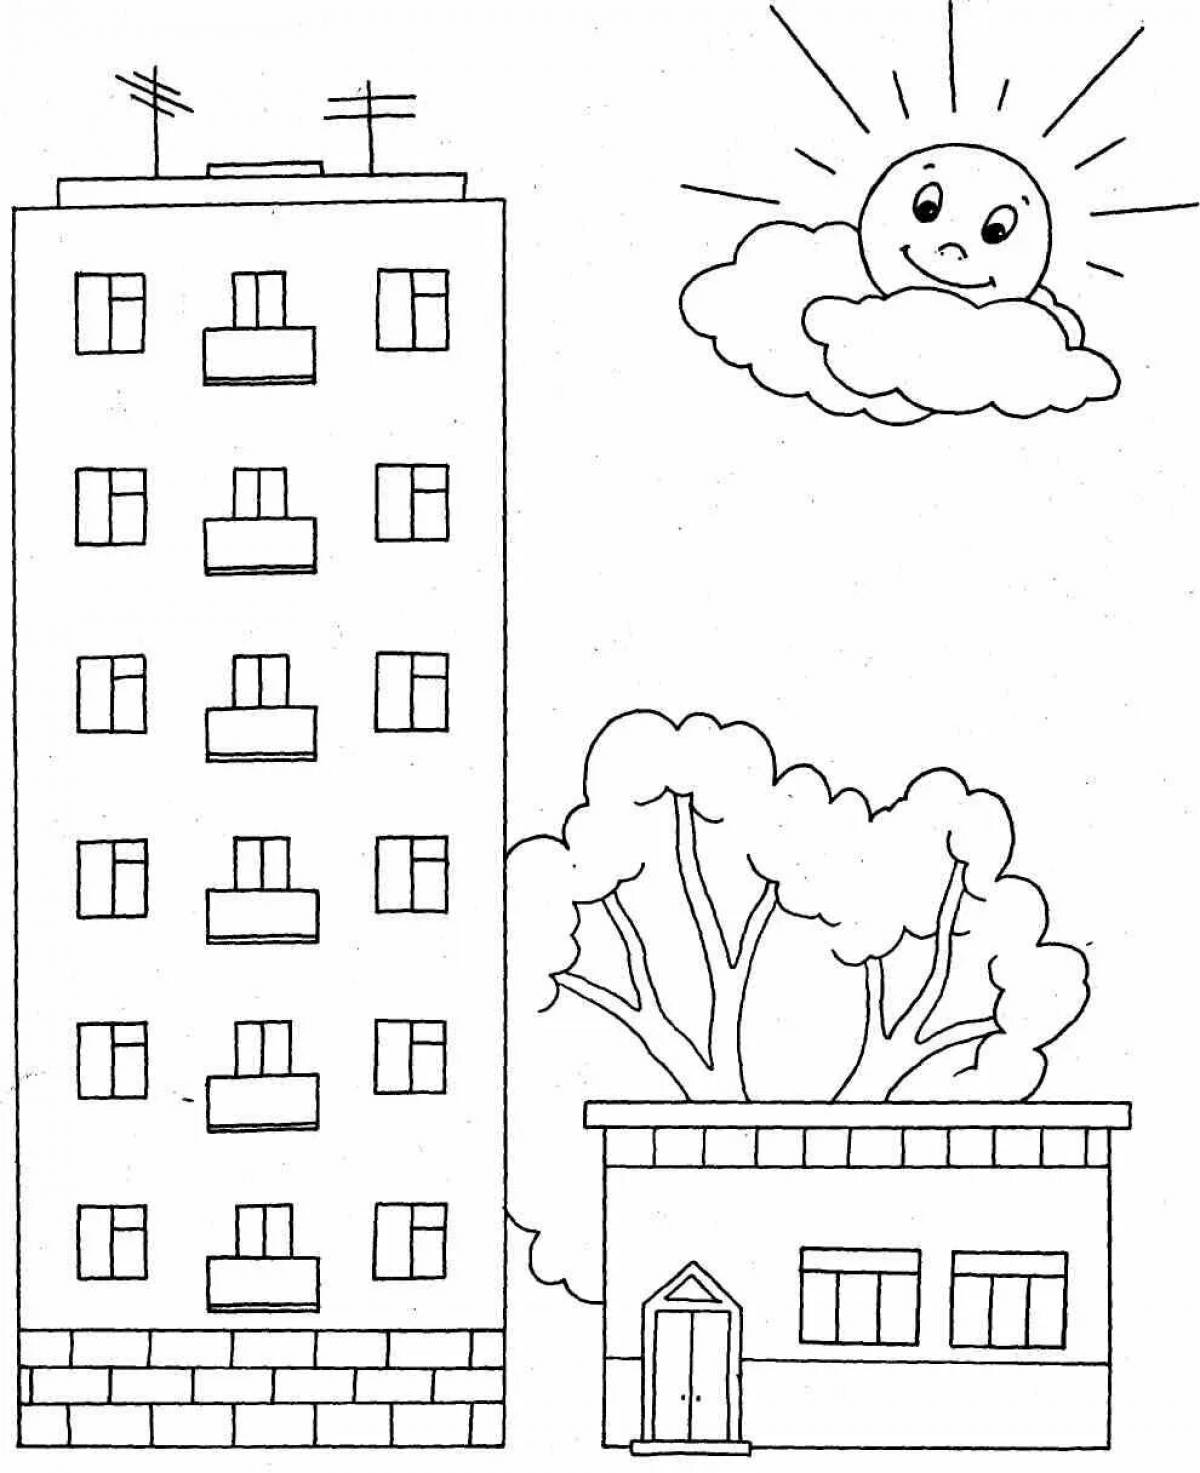 High-rise building coloring pages for kids